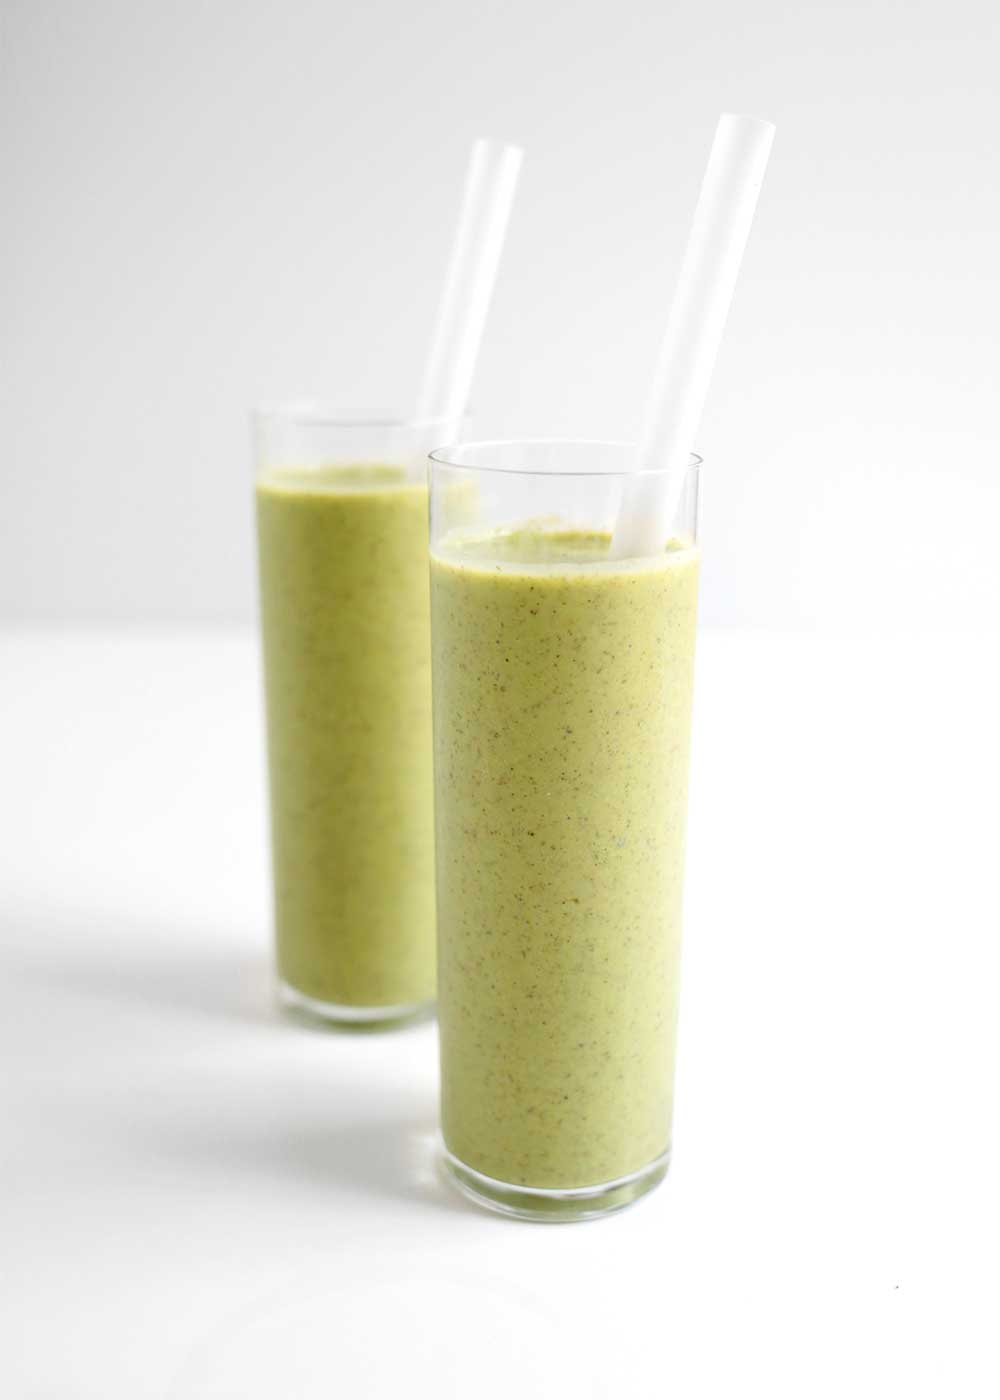 Kev's Kale vegan Protein Smoothie from the faux martha